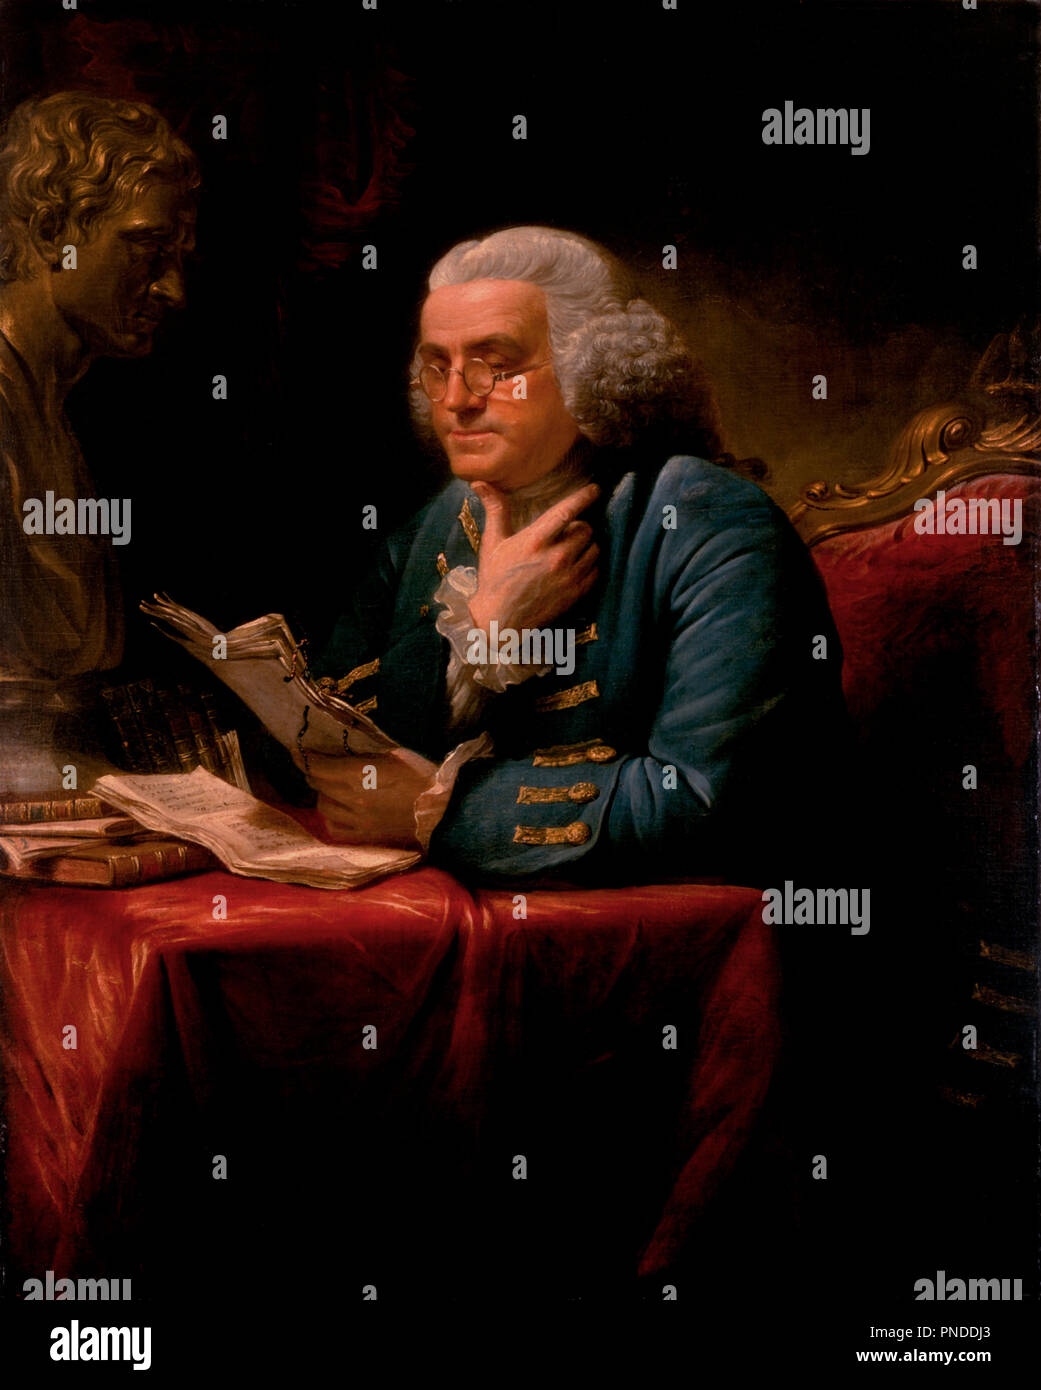 Benjamin Franklin. Date/Period: 1767. Painting. Oil on canvas, mounted on panel Oil on canvas, mounted on panel. Height: 1,271.52 mm (50.06 in); Width: 1,014.47 mm (39.94 in). Author: DAVID MARTIN. MARTIN, DAVID. Stock Photo